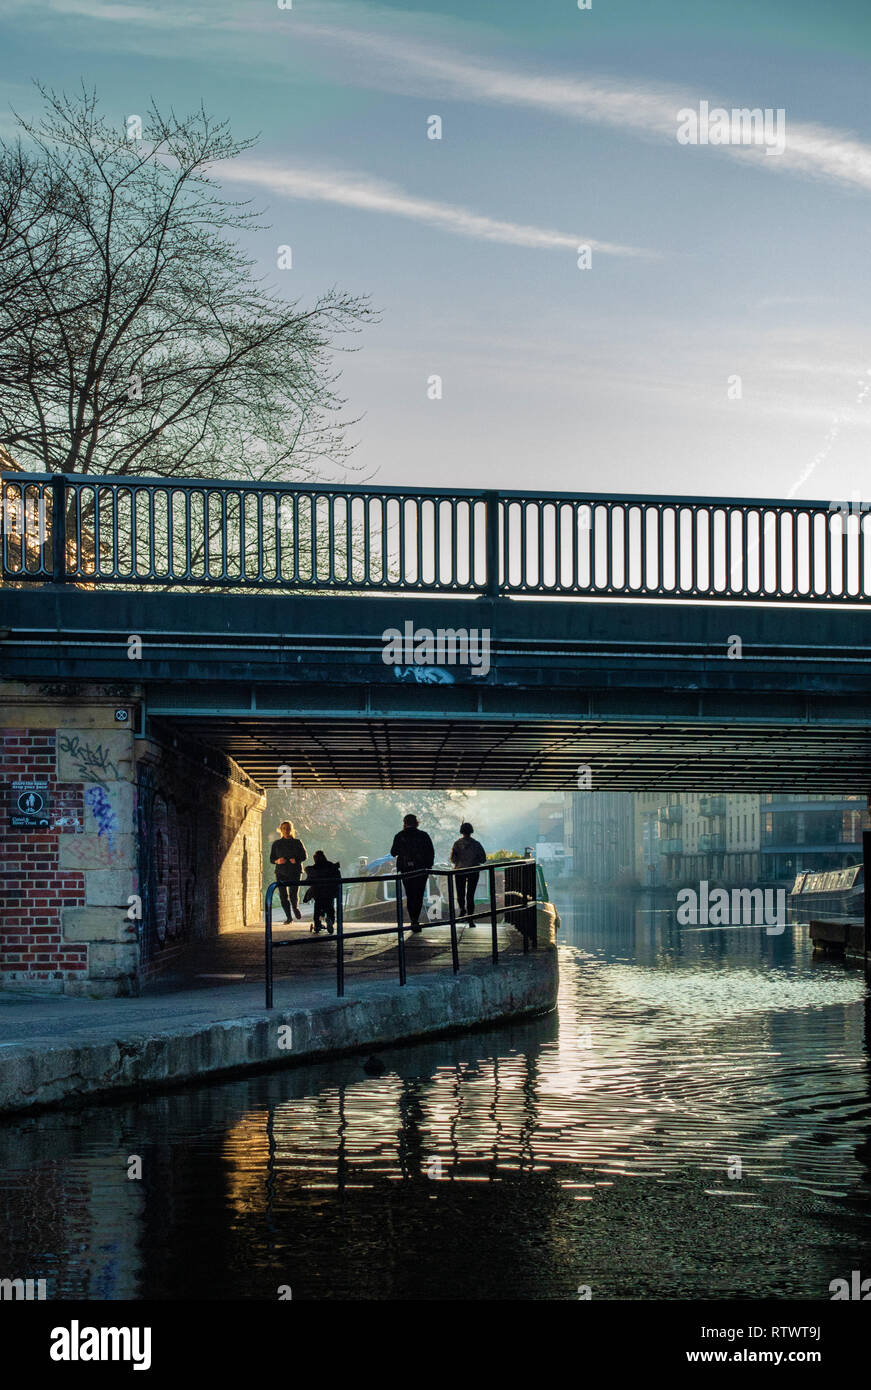 Commuters in the early morning light on the Regents Canal, London near Kings Cross, England Stock Photo